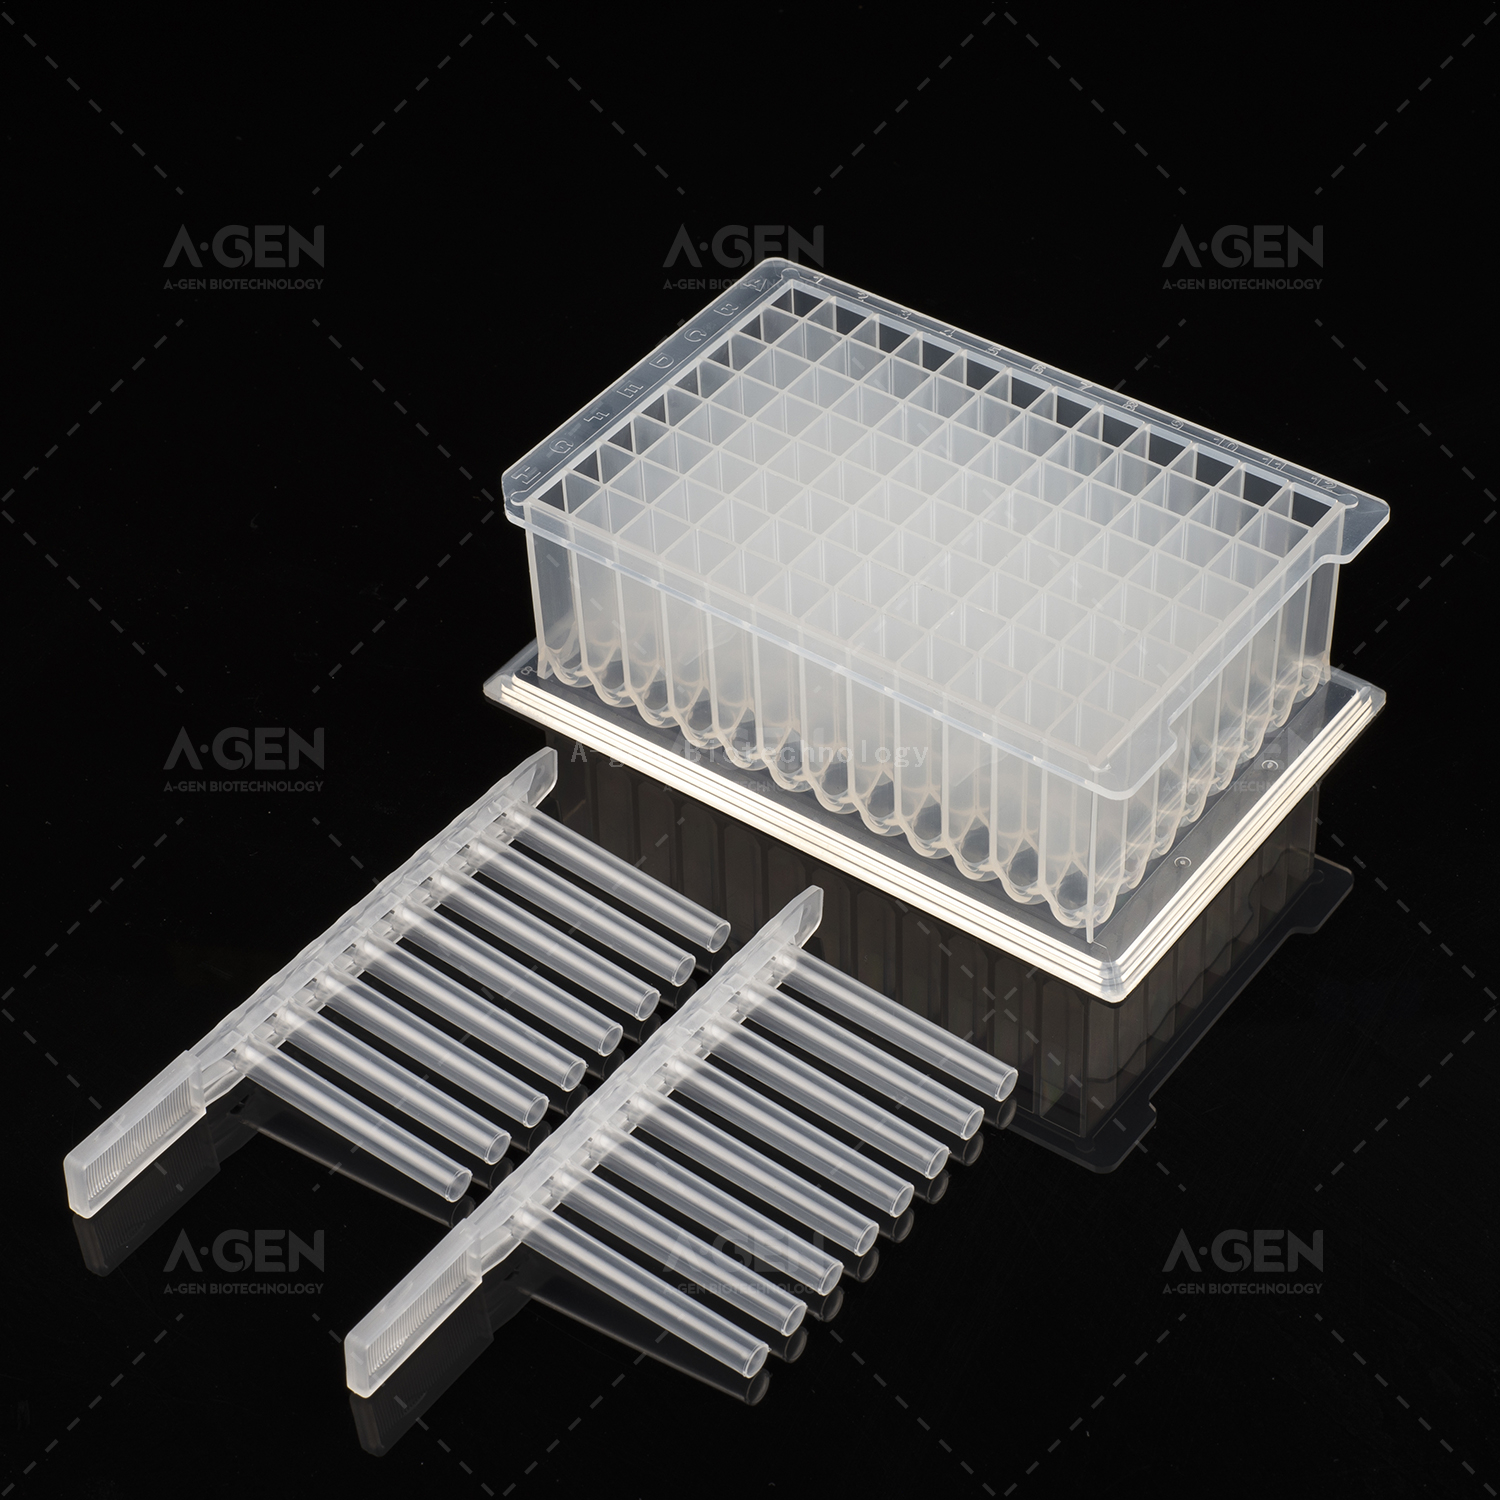 Lab Supplies 2.2ml 96 Square-Well Deep Well Plate